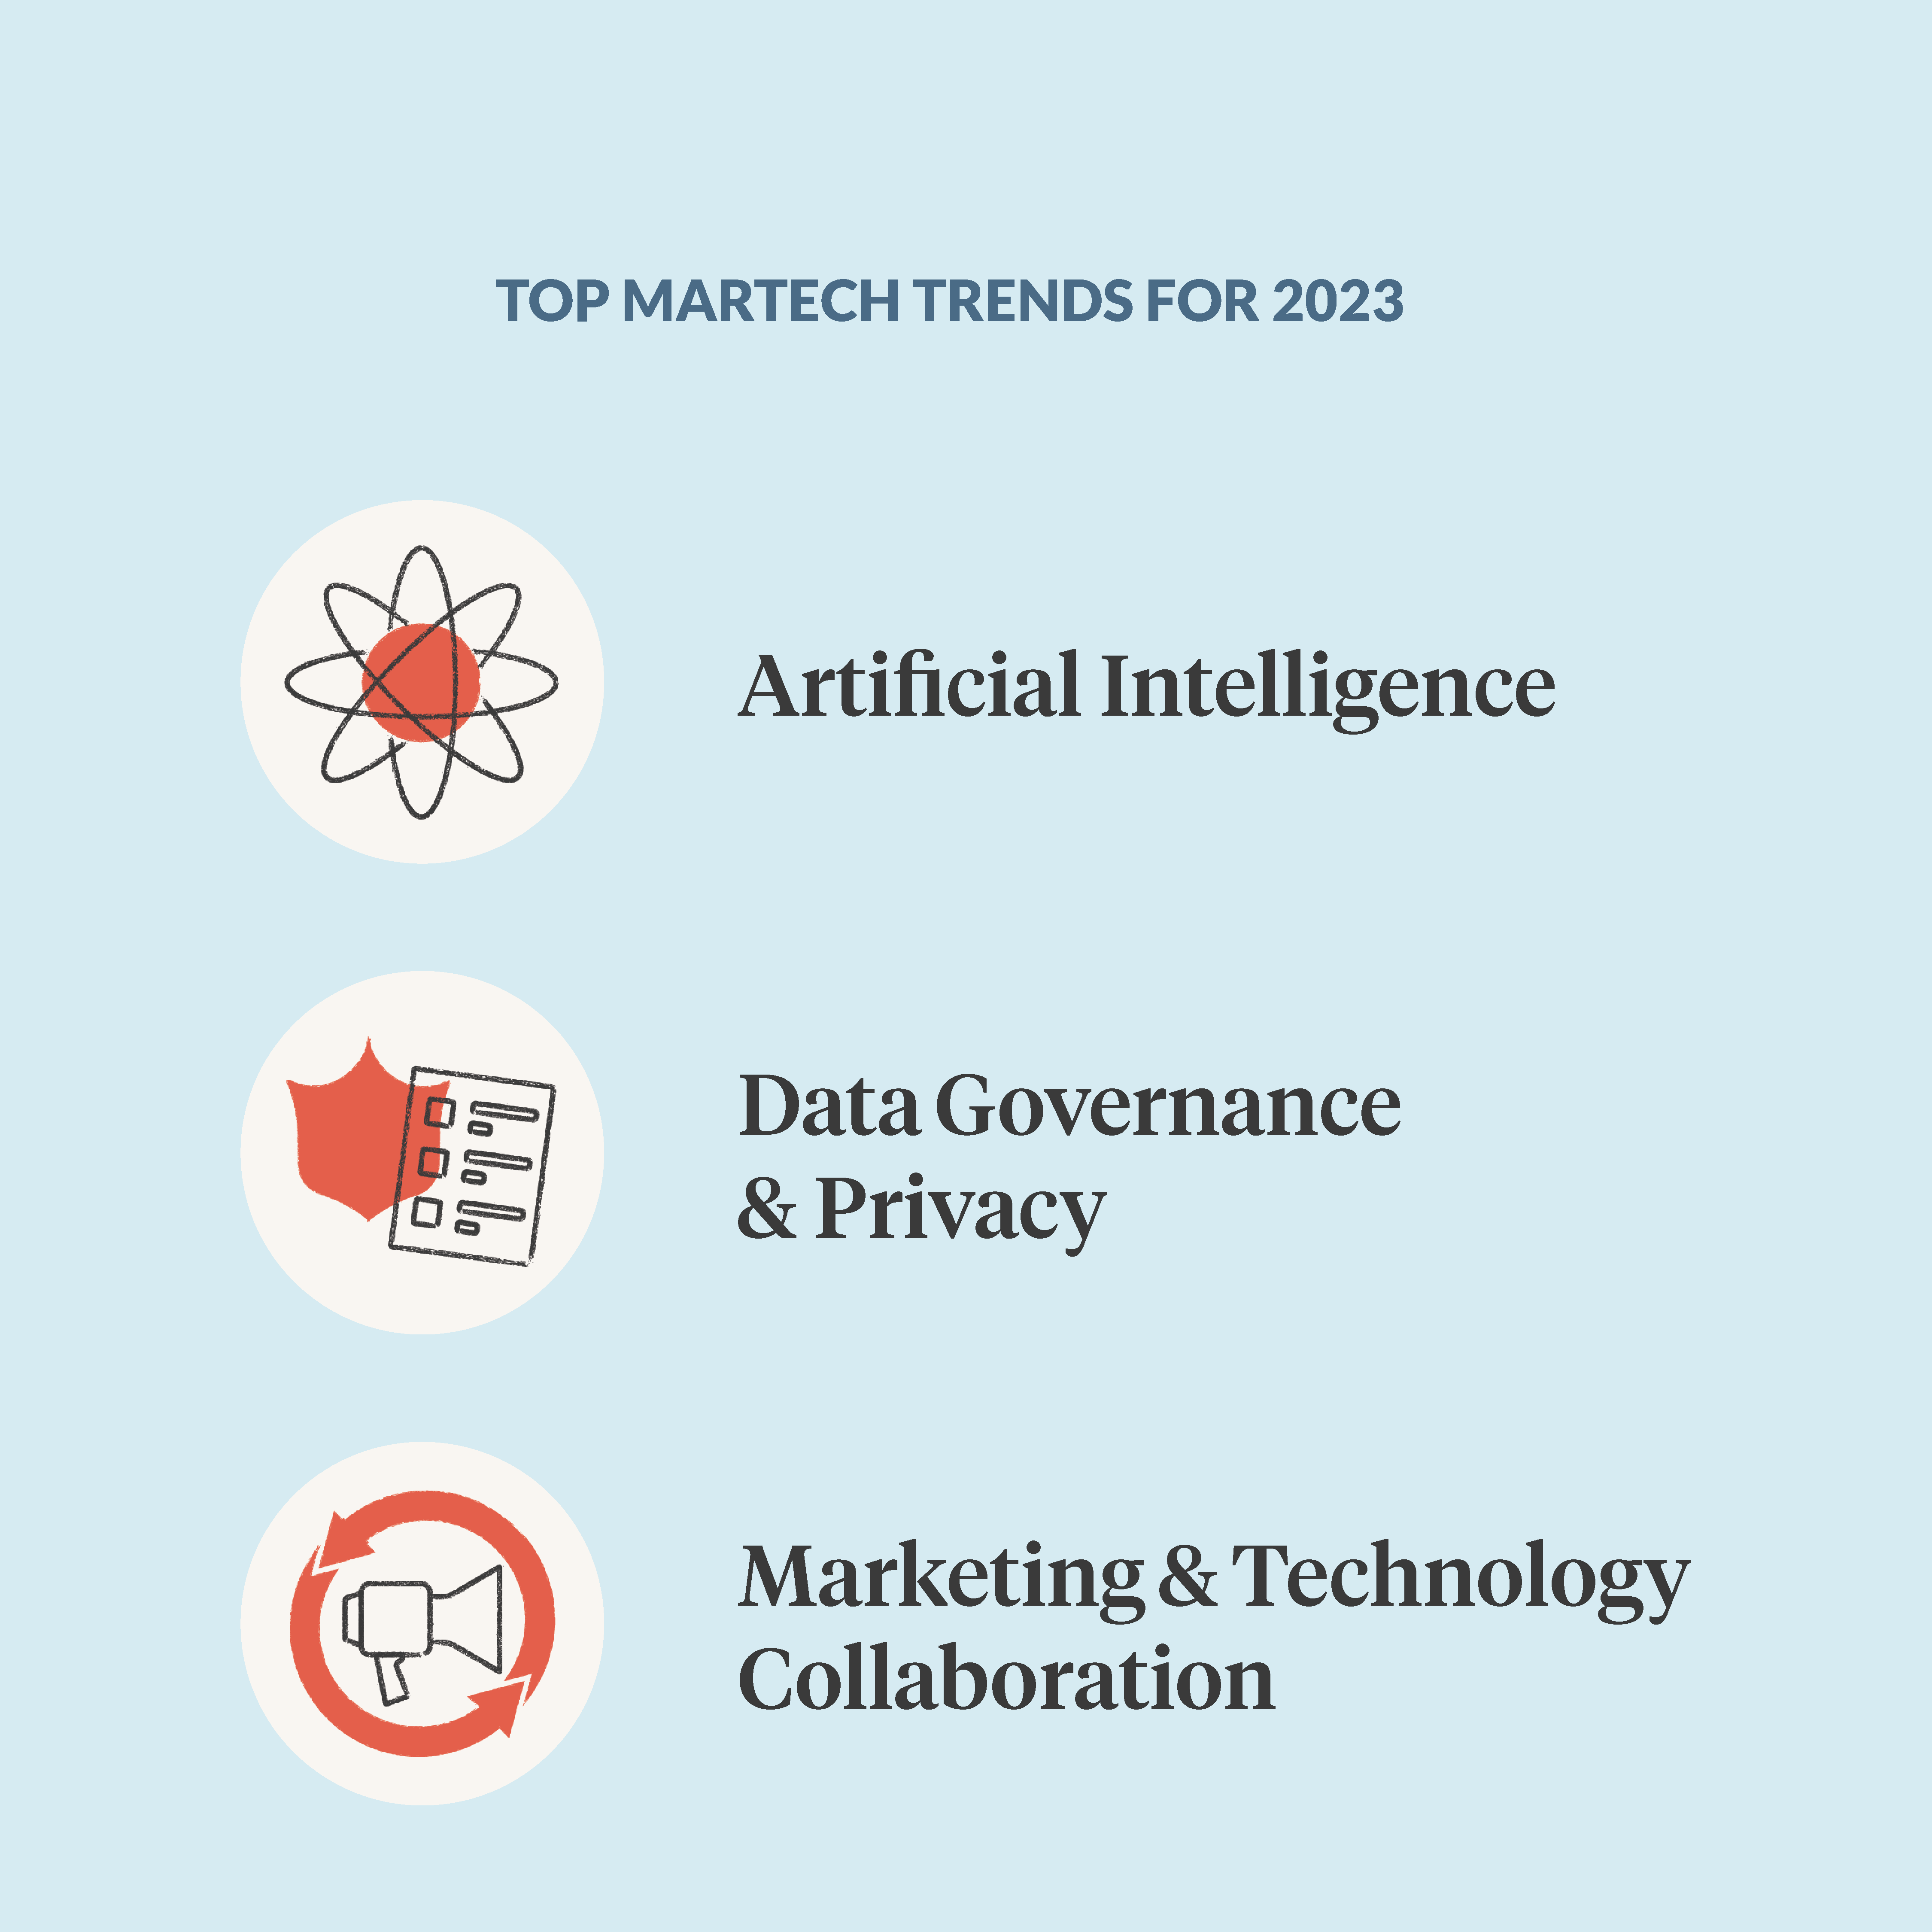 Three MarTech Trends in 2023